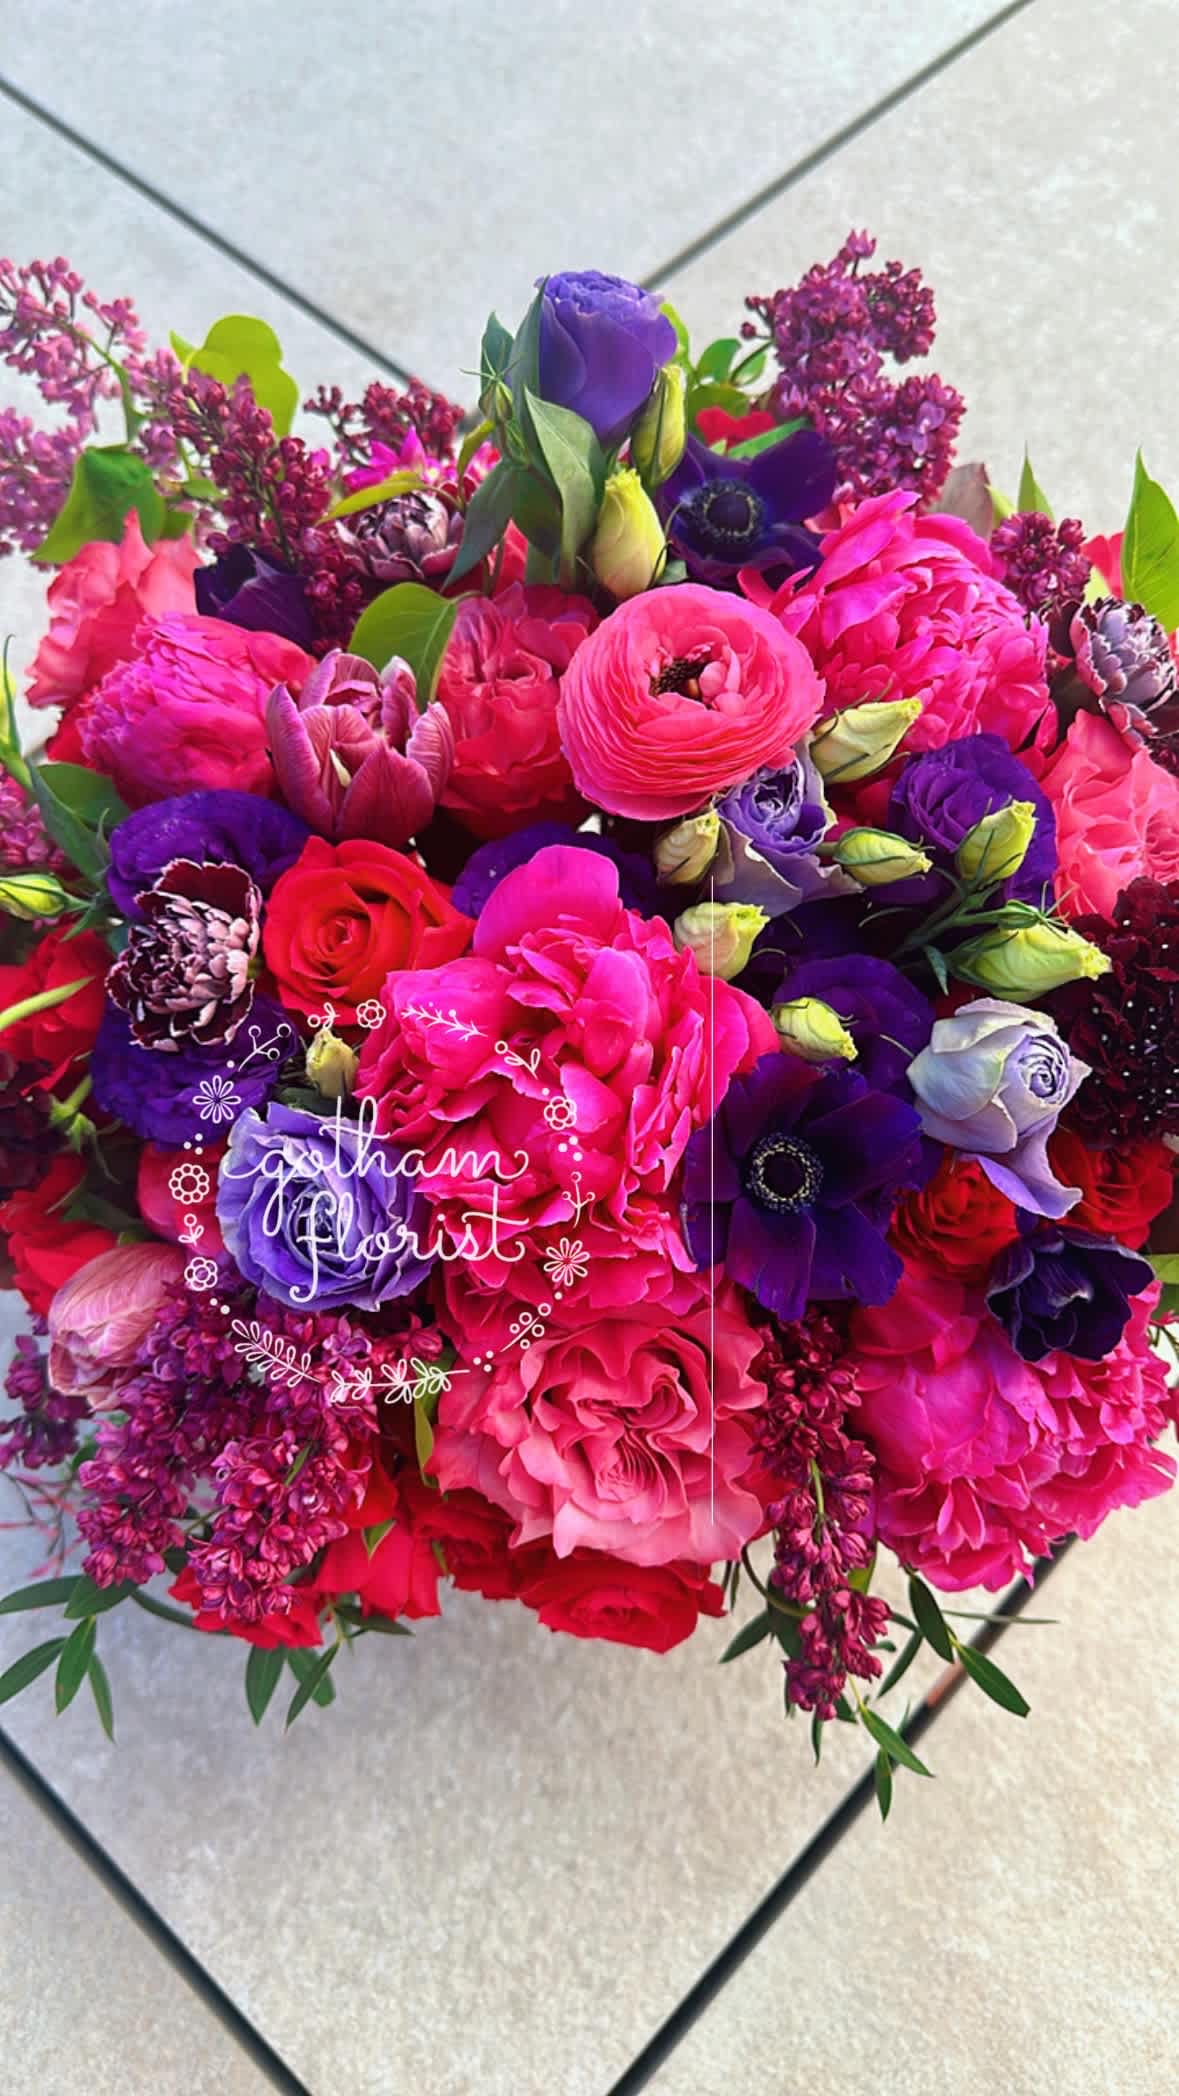 Wishes  - Jewel tone roses , peonies and ranunculus. Bright beautiful blooms perfect for #mothersday